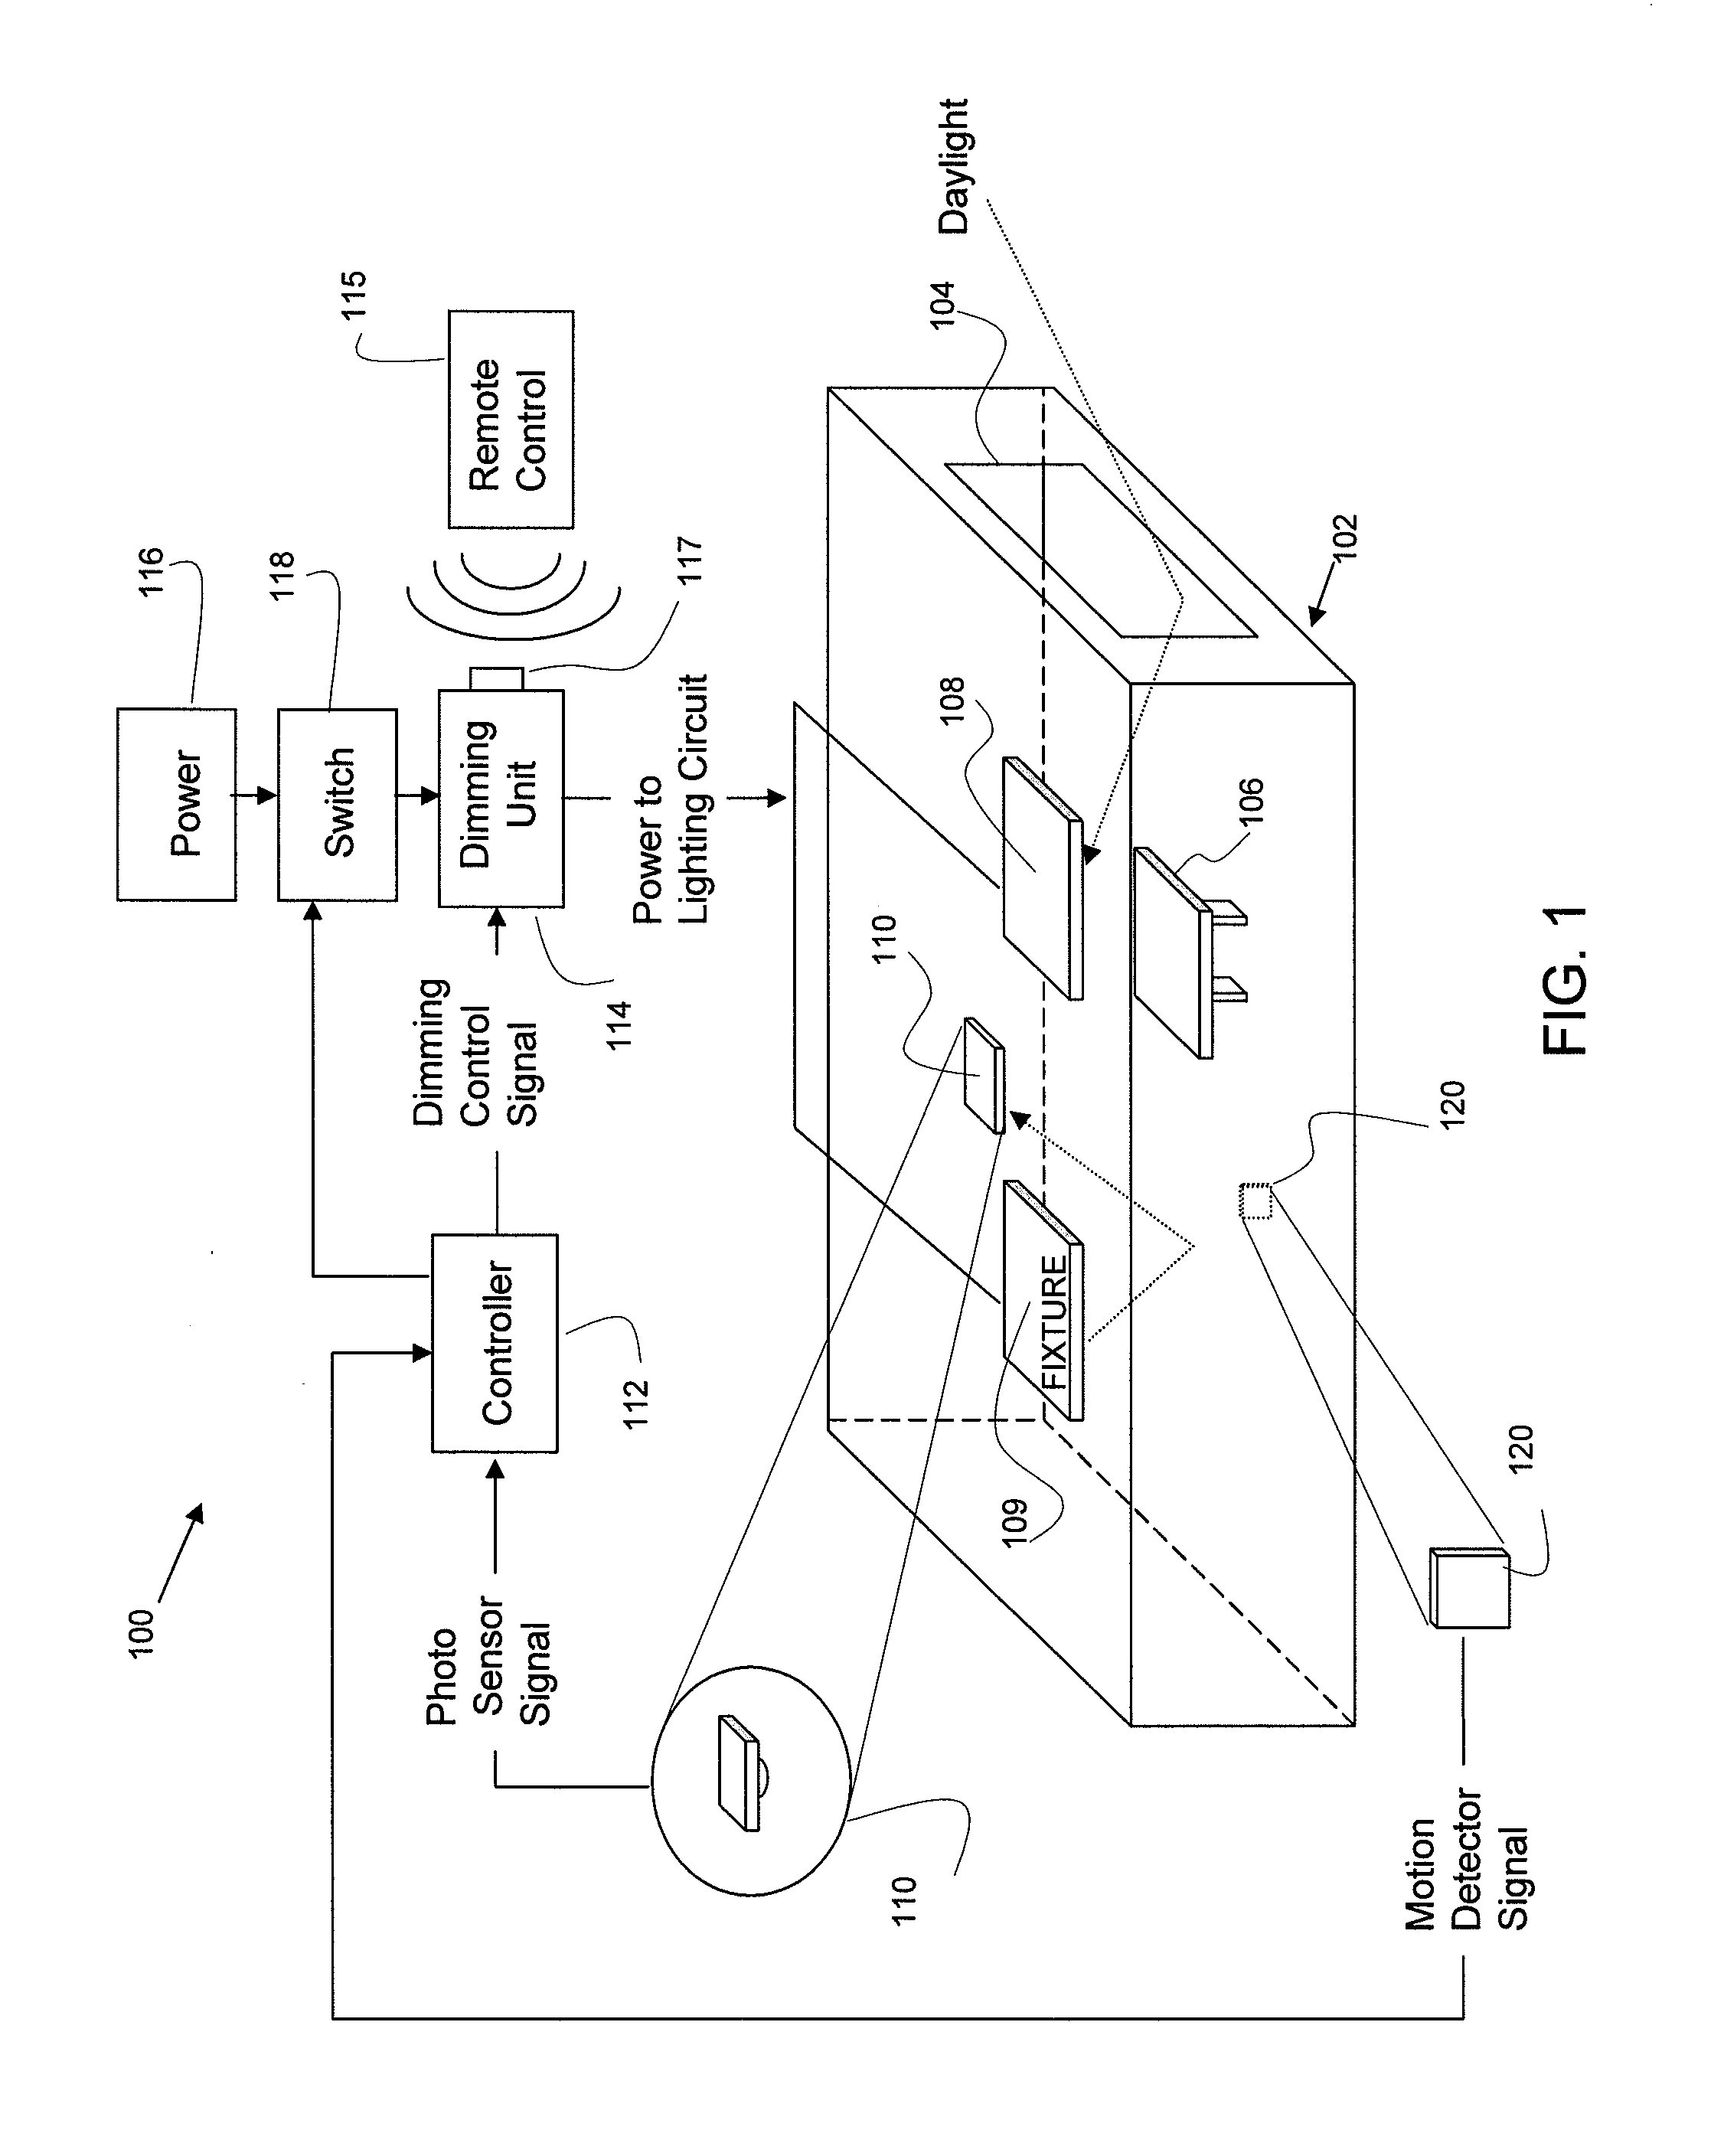 Automated Dimming Methods and Systems For Lighting